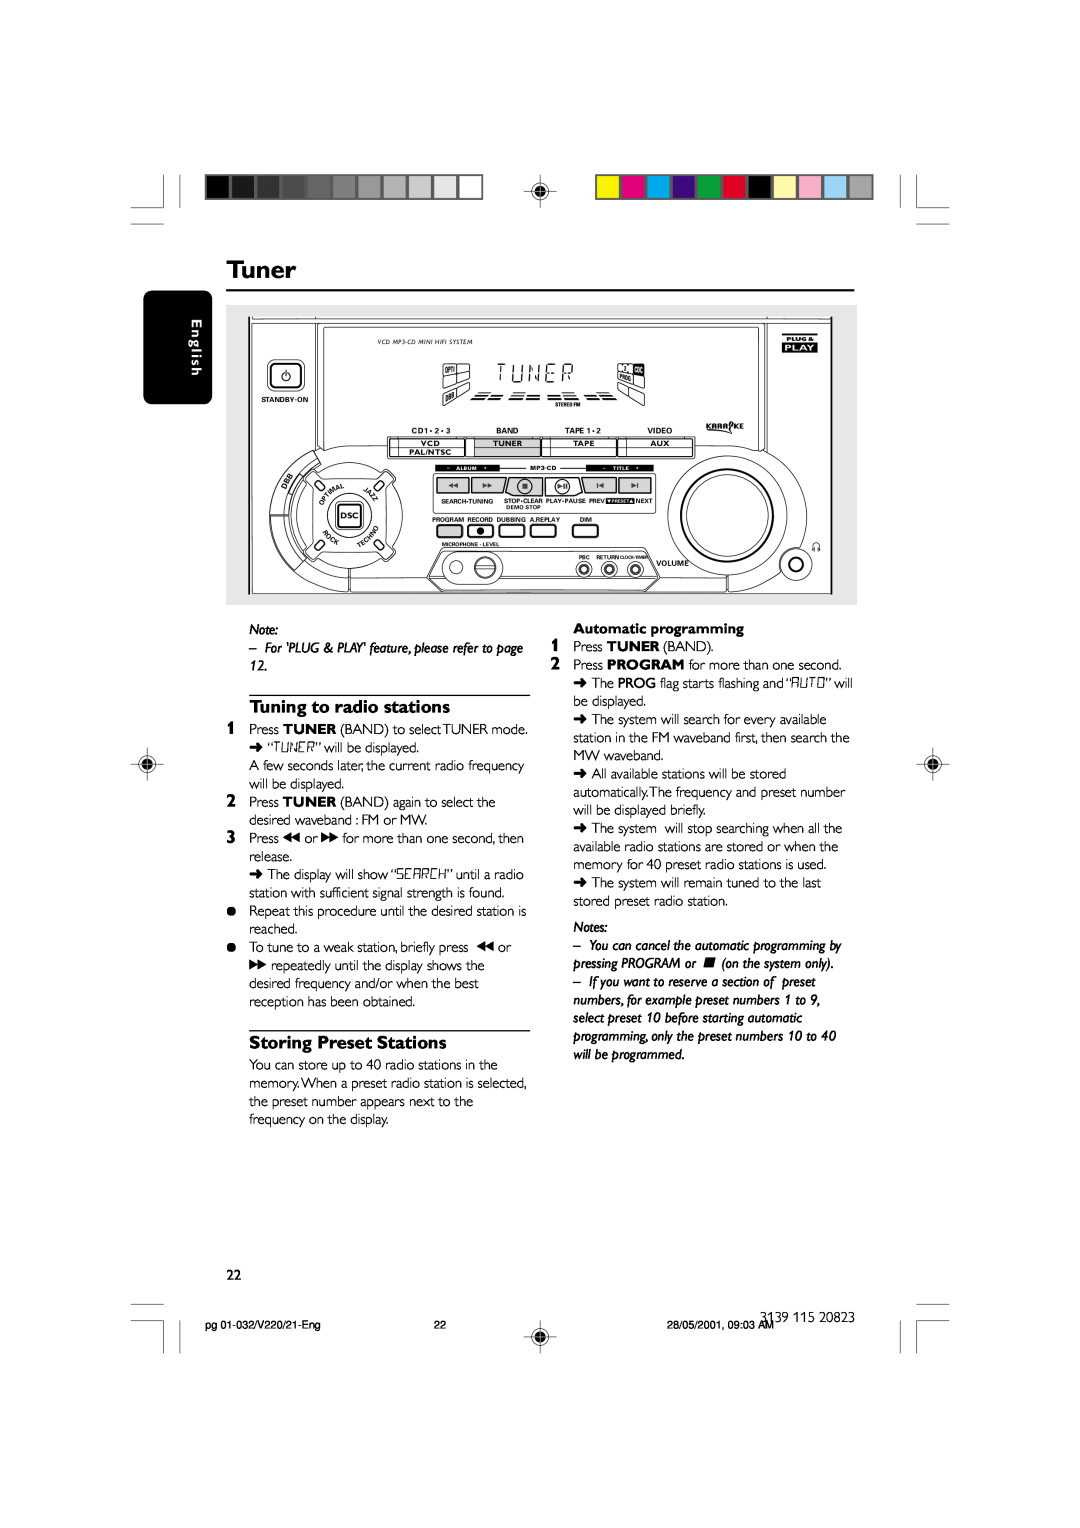 Philips FW-V220/21 manual Tuning to radio stations, Storing Preset Stations, lish, Automatic programming, Tuner, à or 